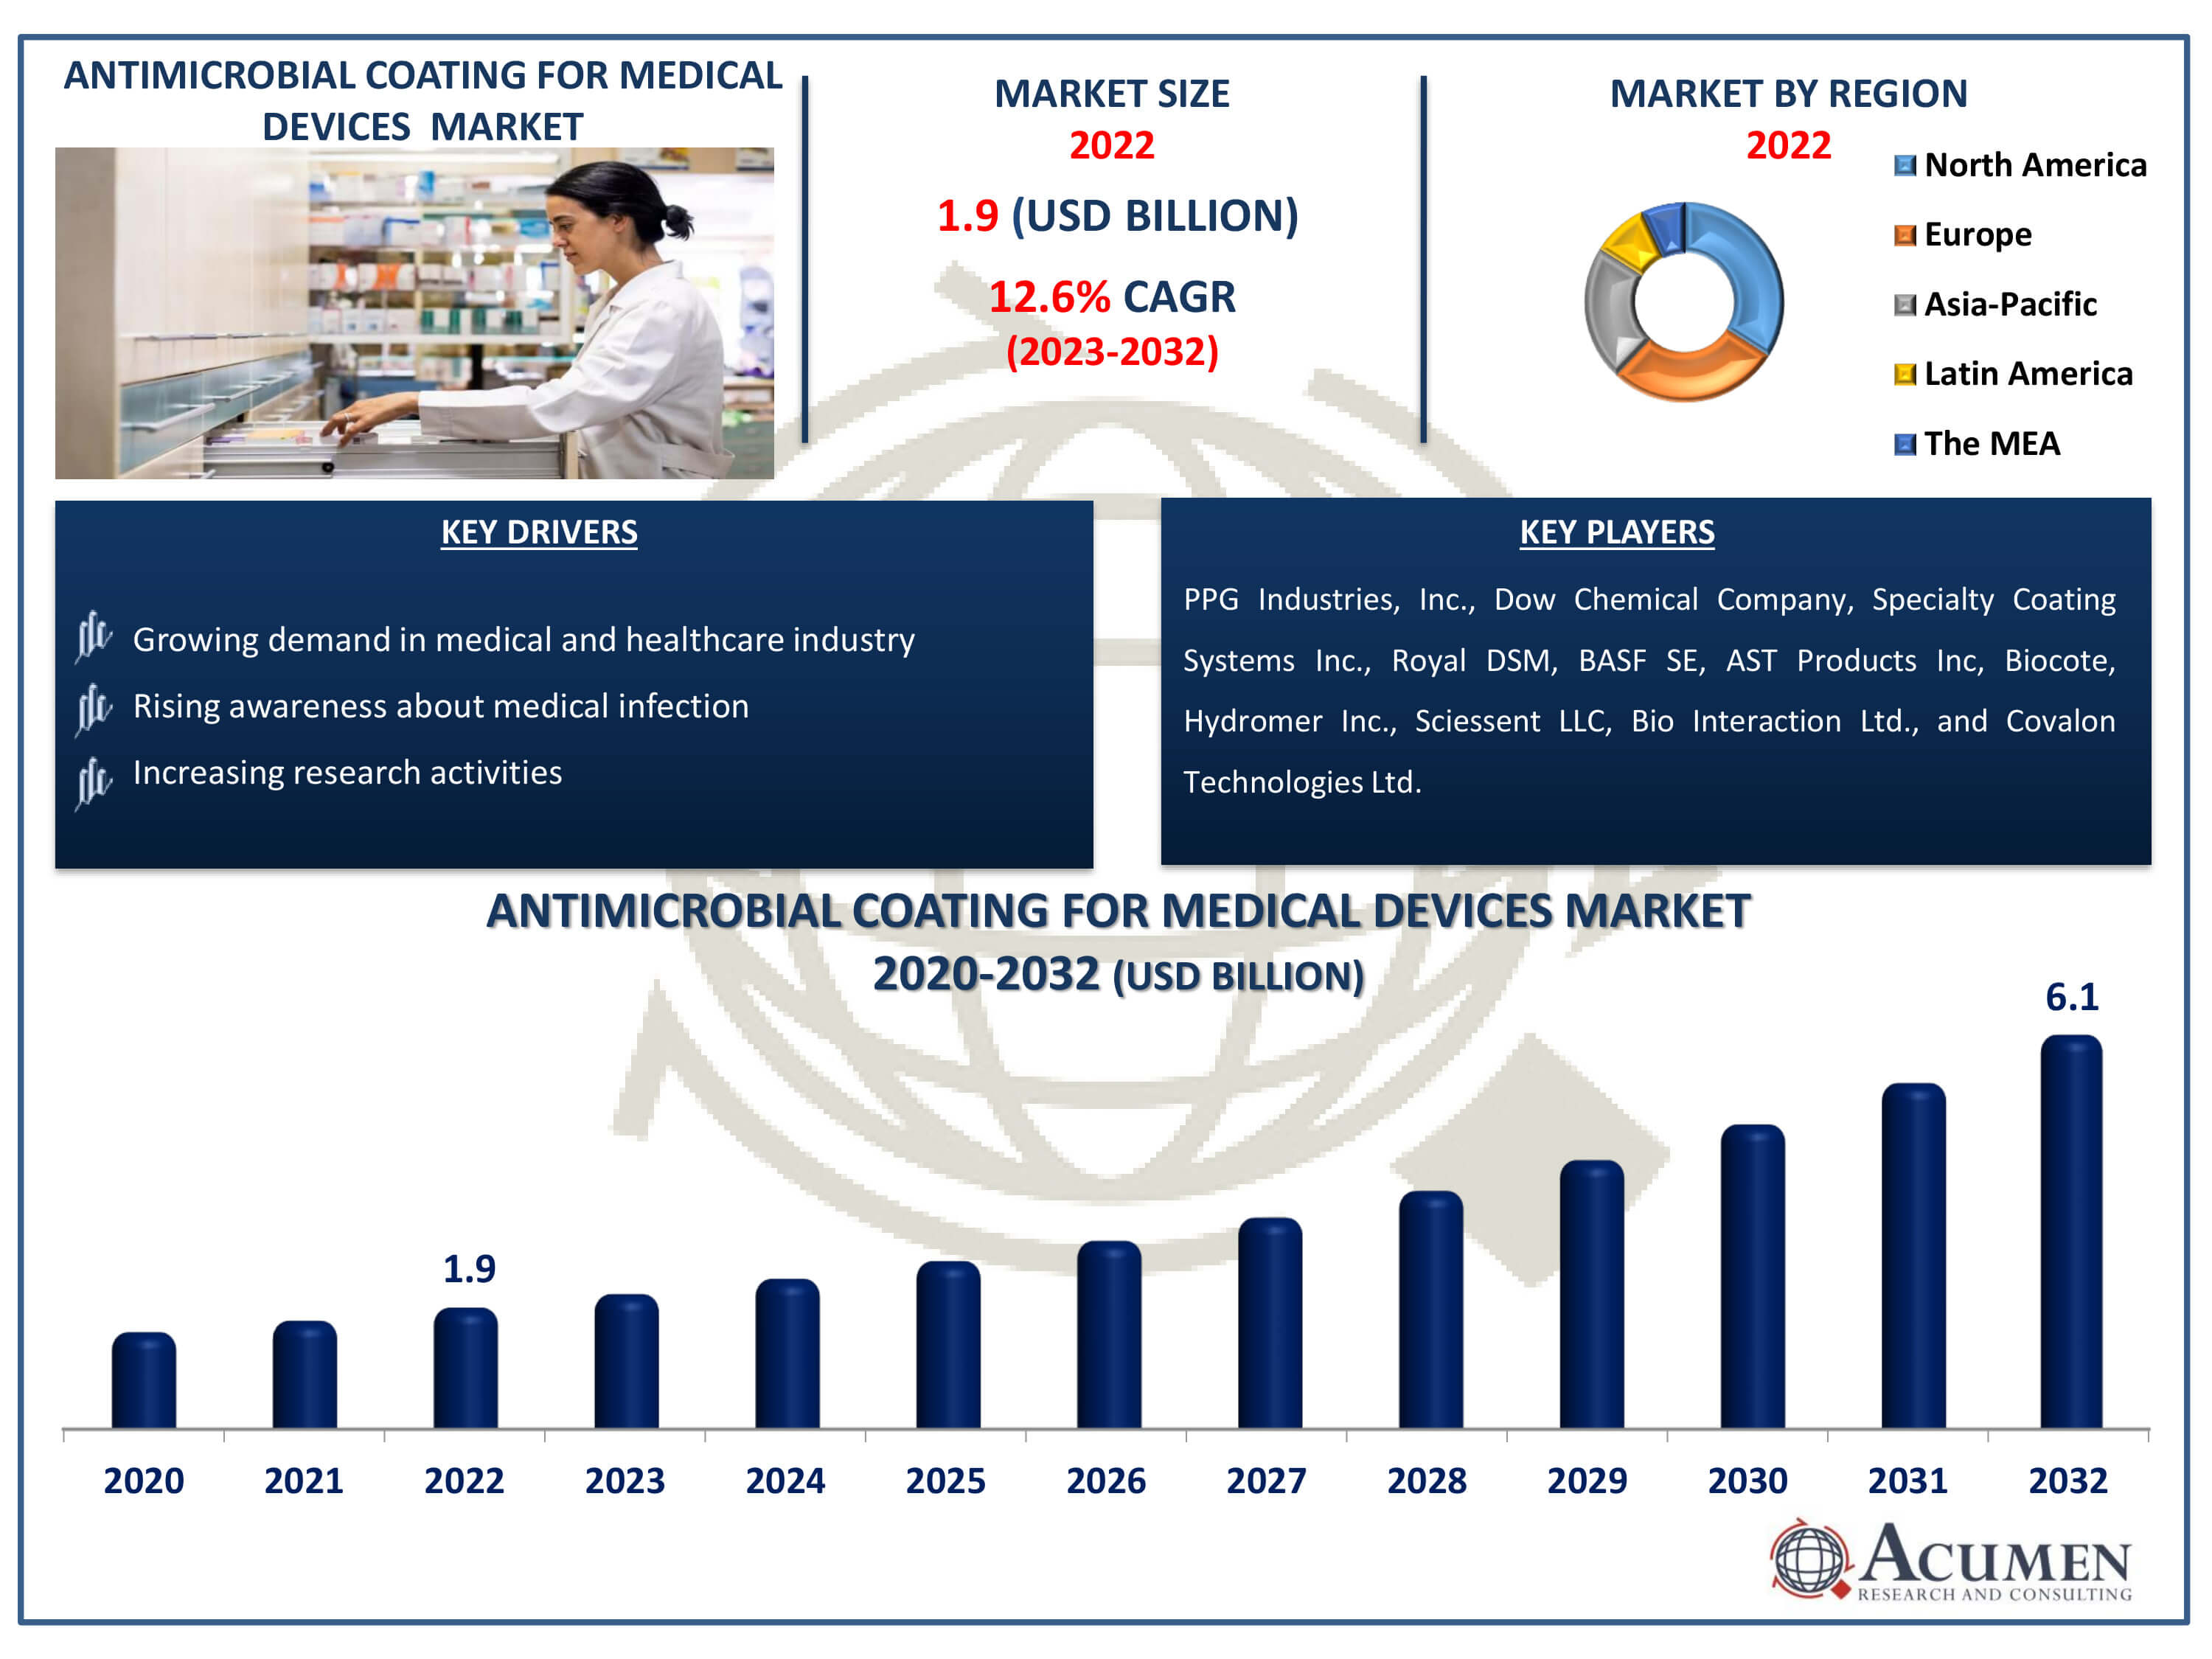 Antimicrobial Coating for Medical Devices Market Dynamics